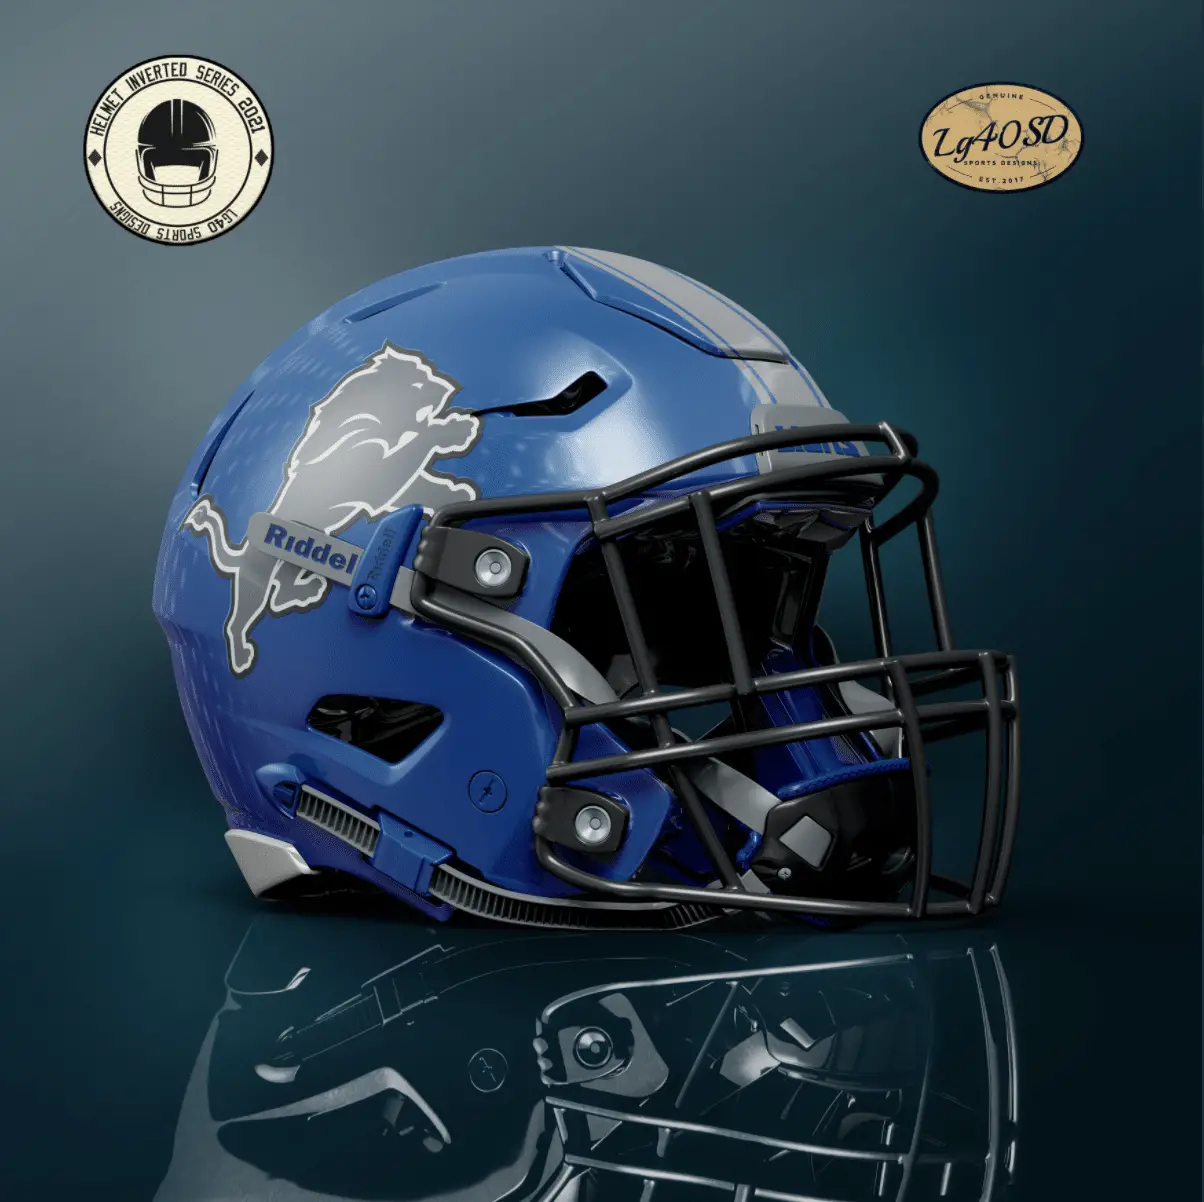 Lions concept helmets. Two different color schemes. Which one is